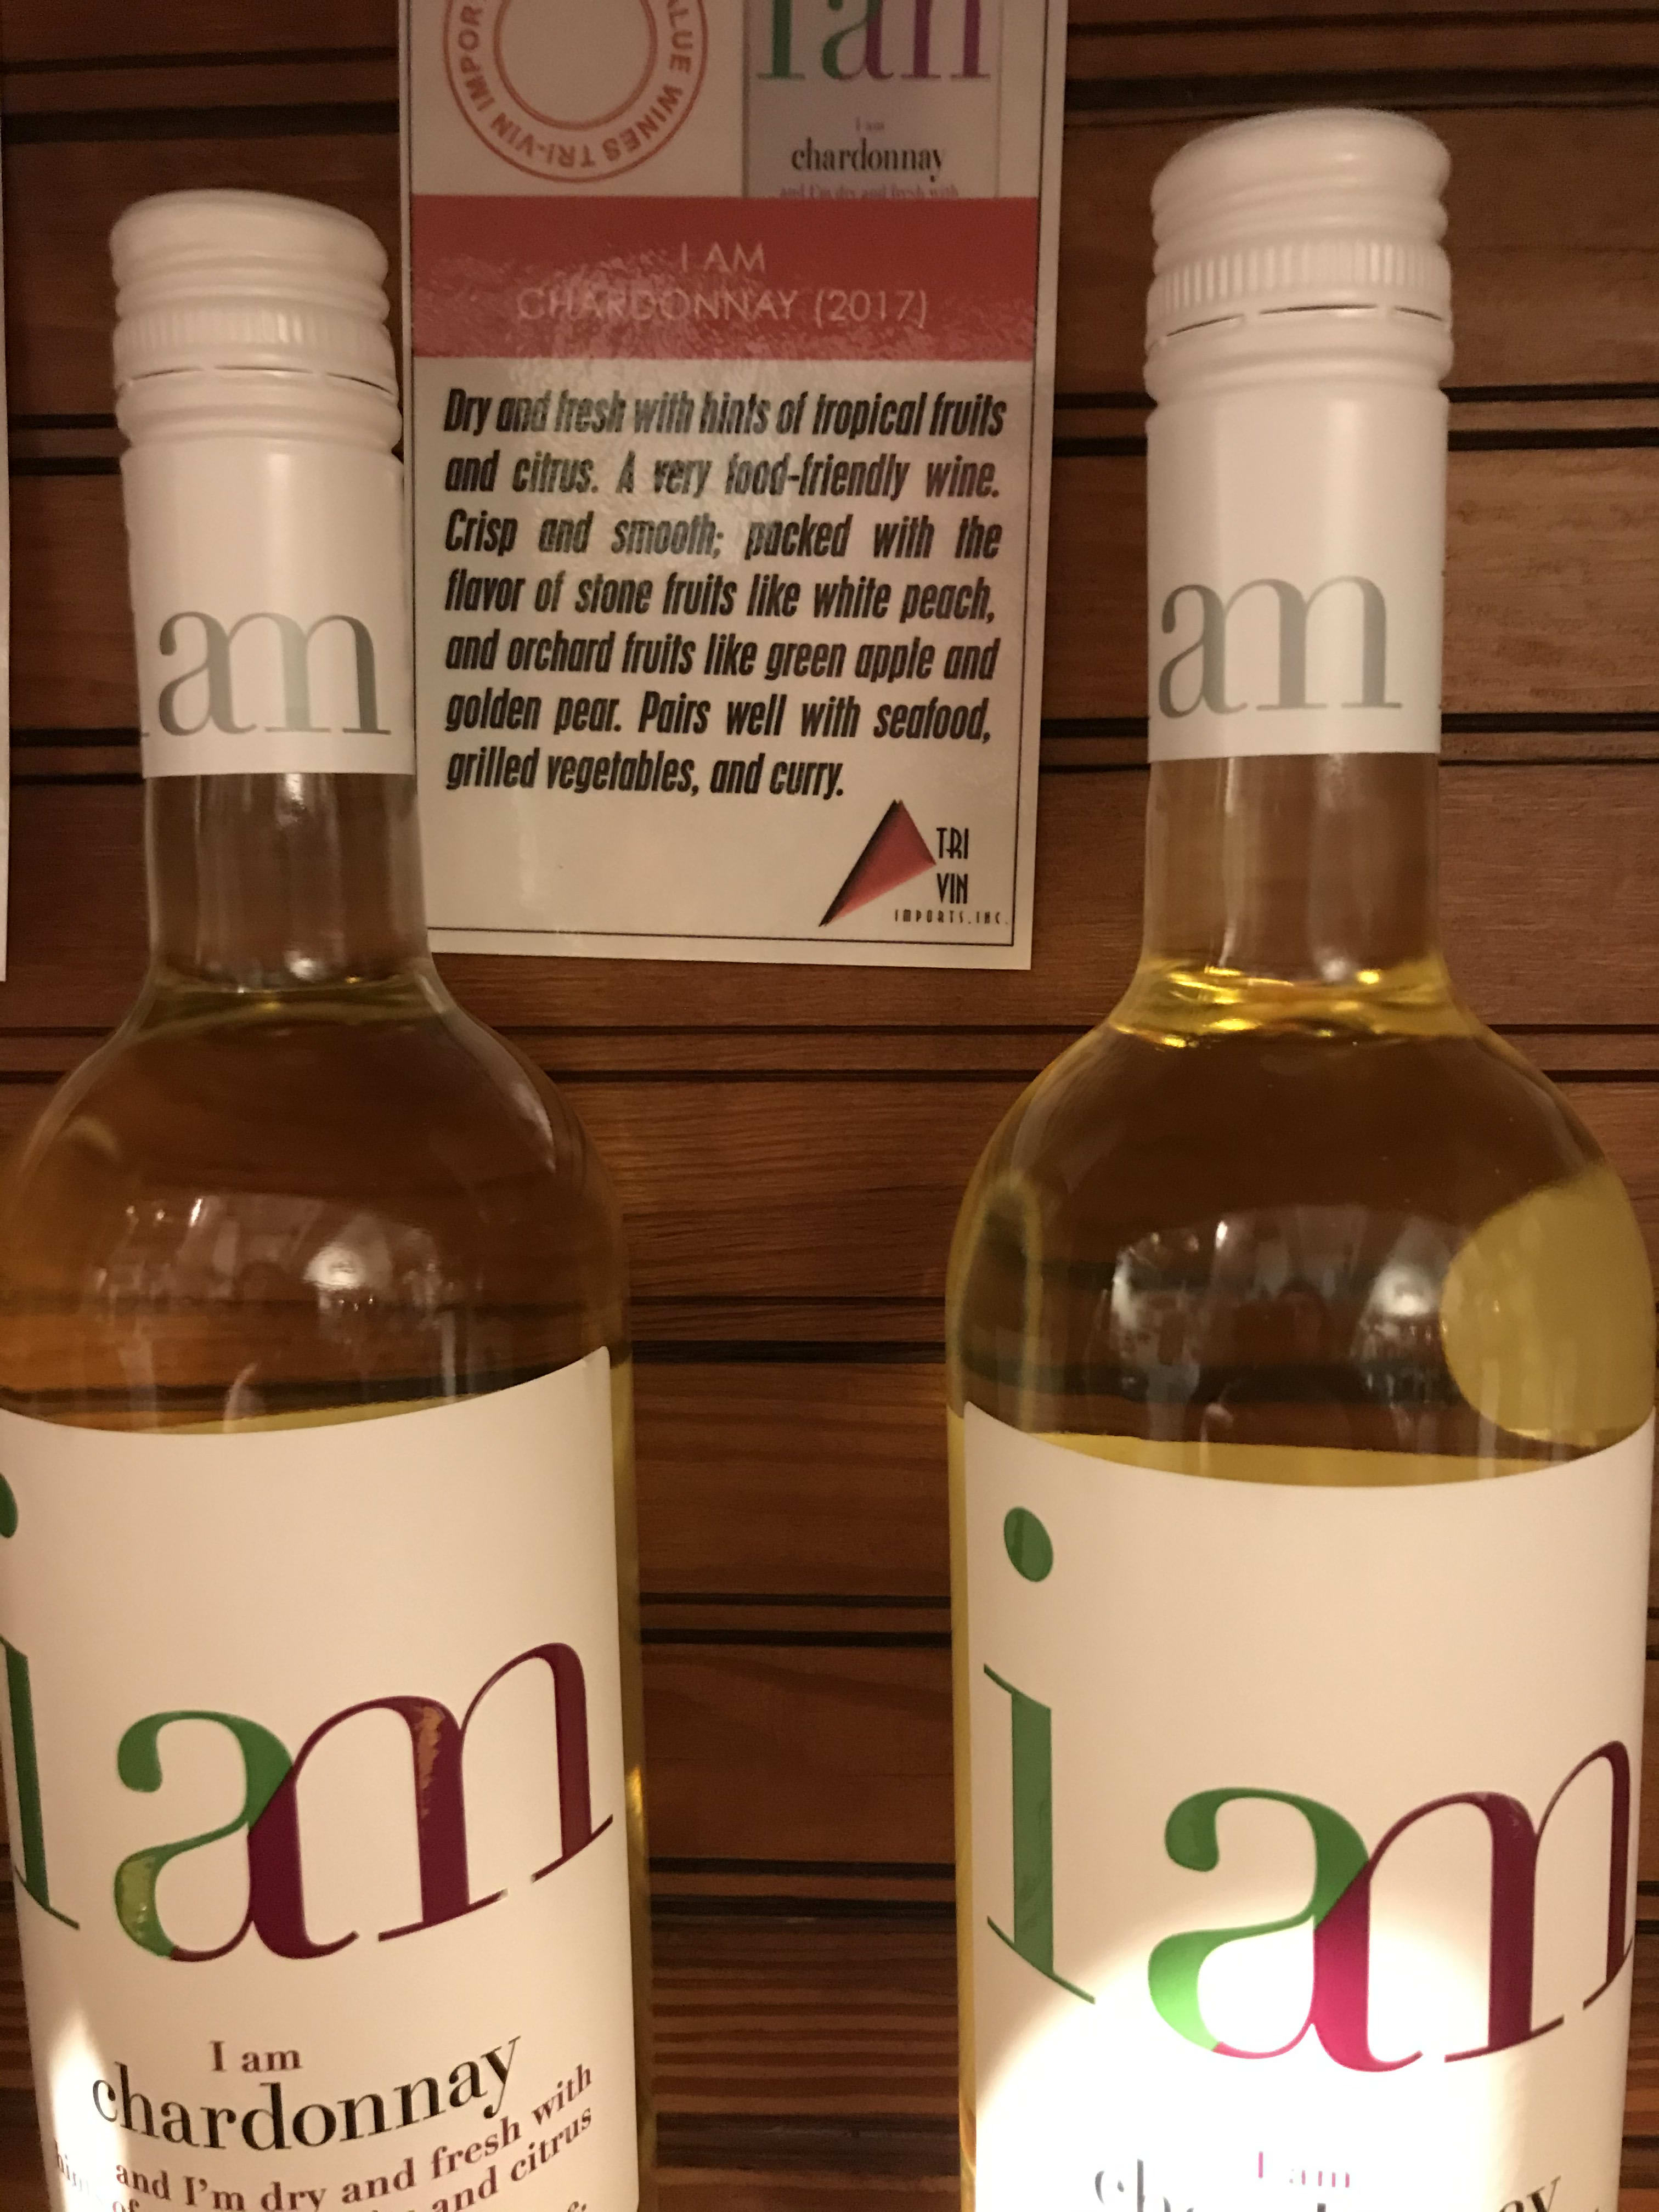 Chardonnay - I Am  Chardonnay and I'm dry and fresh with hints of tropical fruits and citrus.  I am a very food-friendly wine,  from Romania (surprise!)